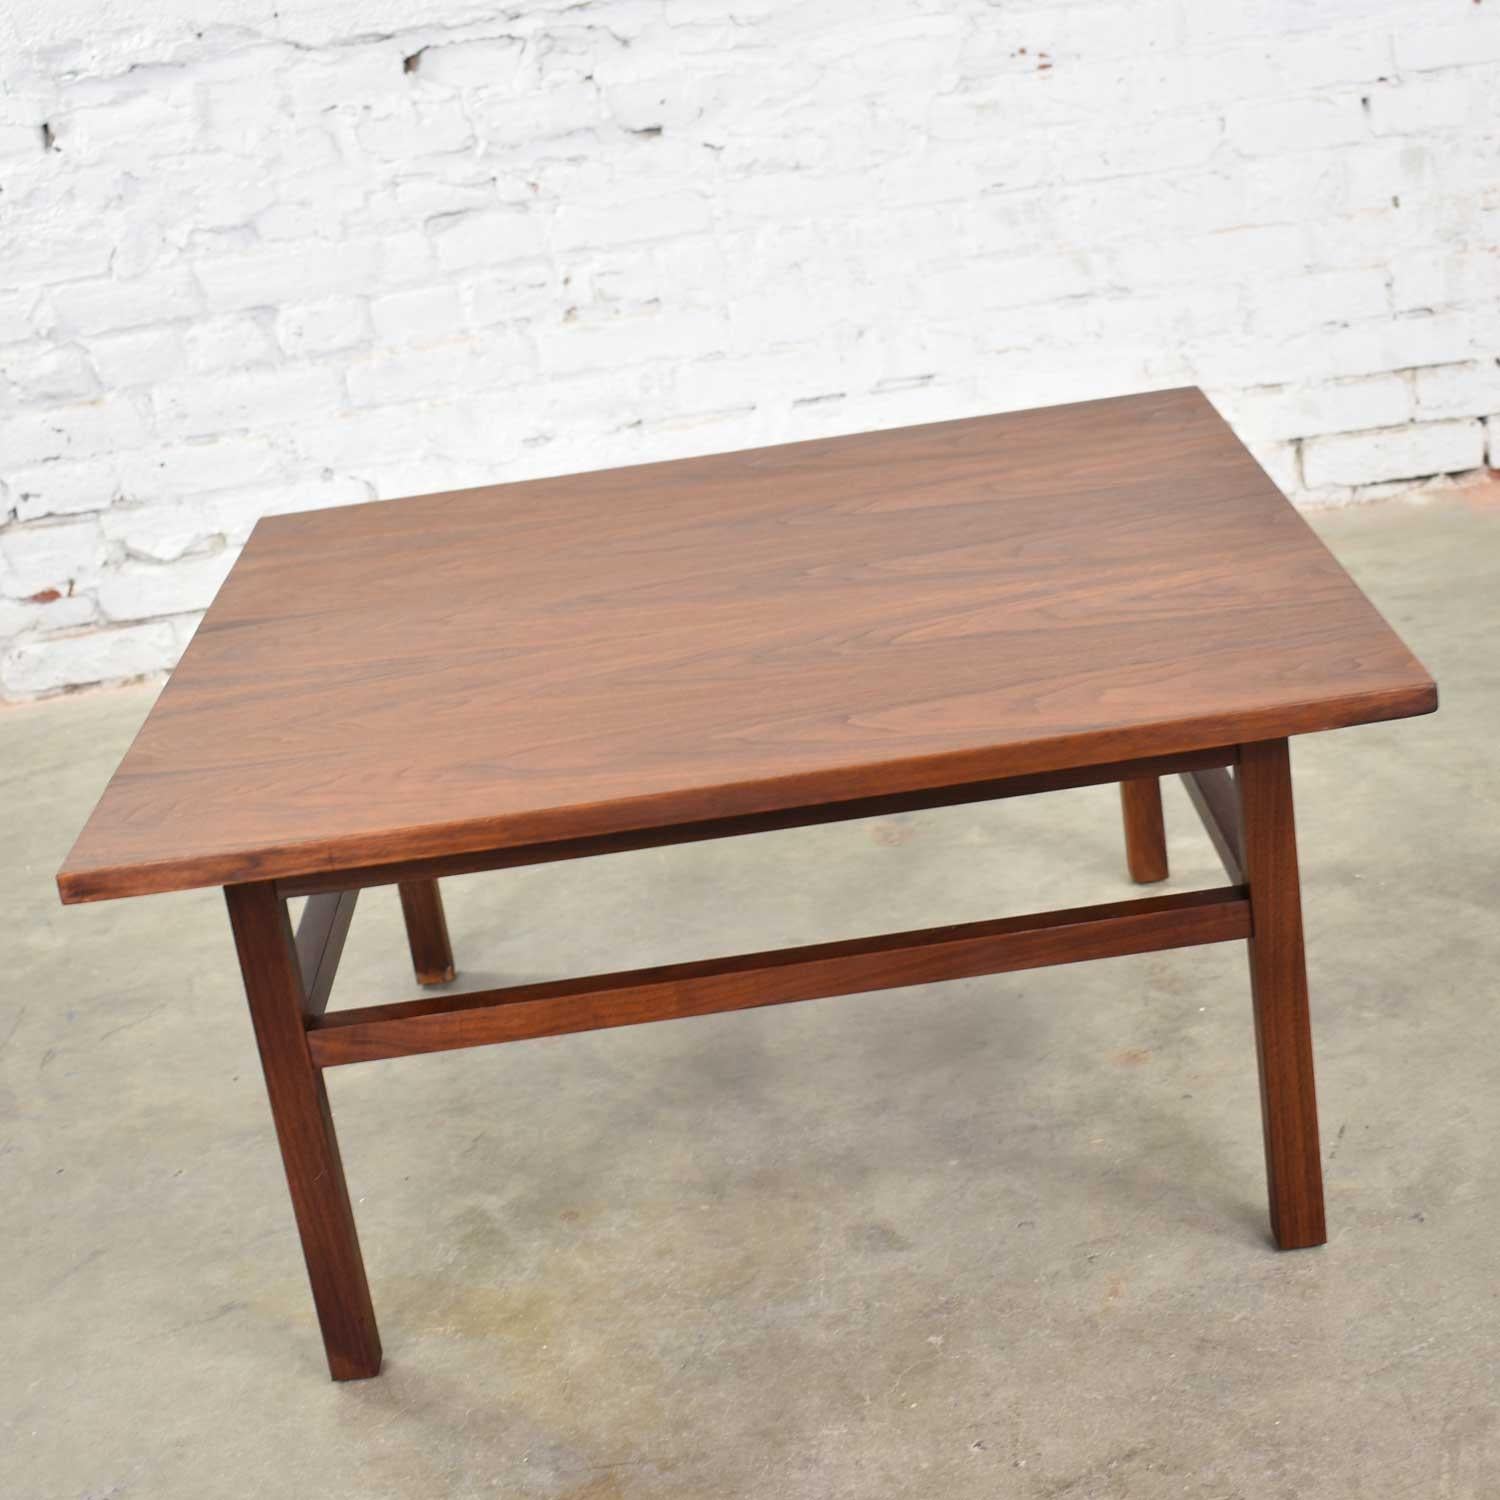 Handsome and versatile Mid-Century Modern walnut cocktail table, coffee table, side table, or end table in the style of Founders Furniture. It is made of solid walnut and in fabulous vintage condition. We have professionally restored the top and